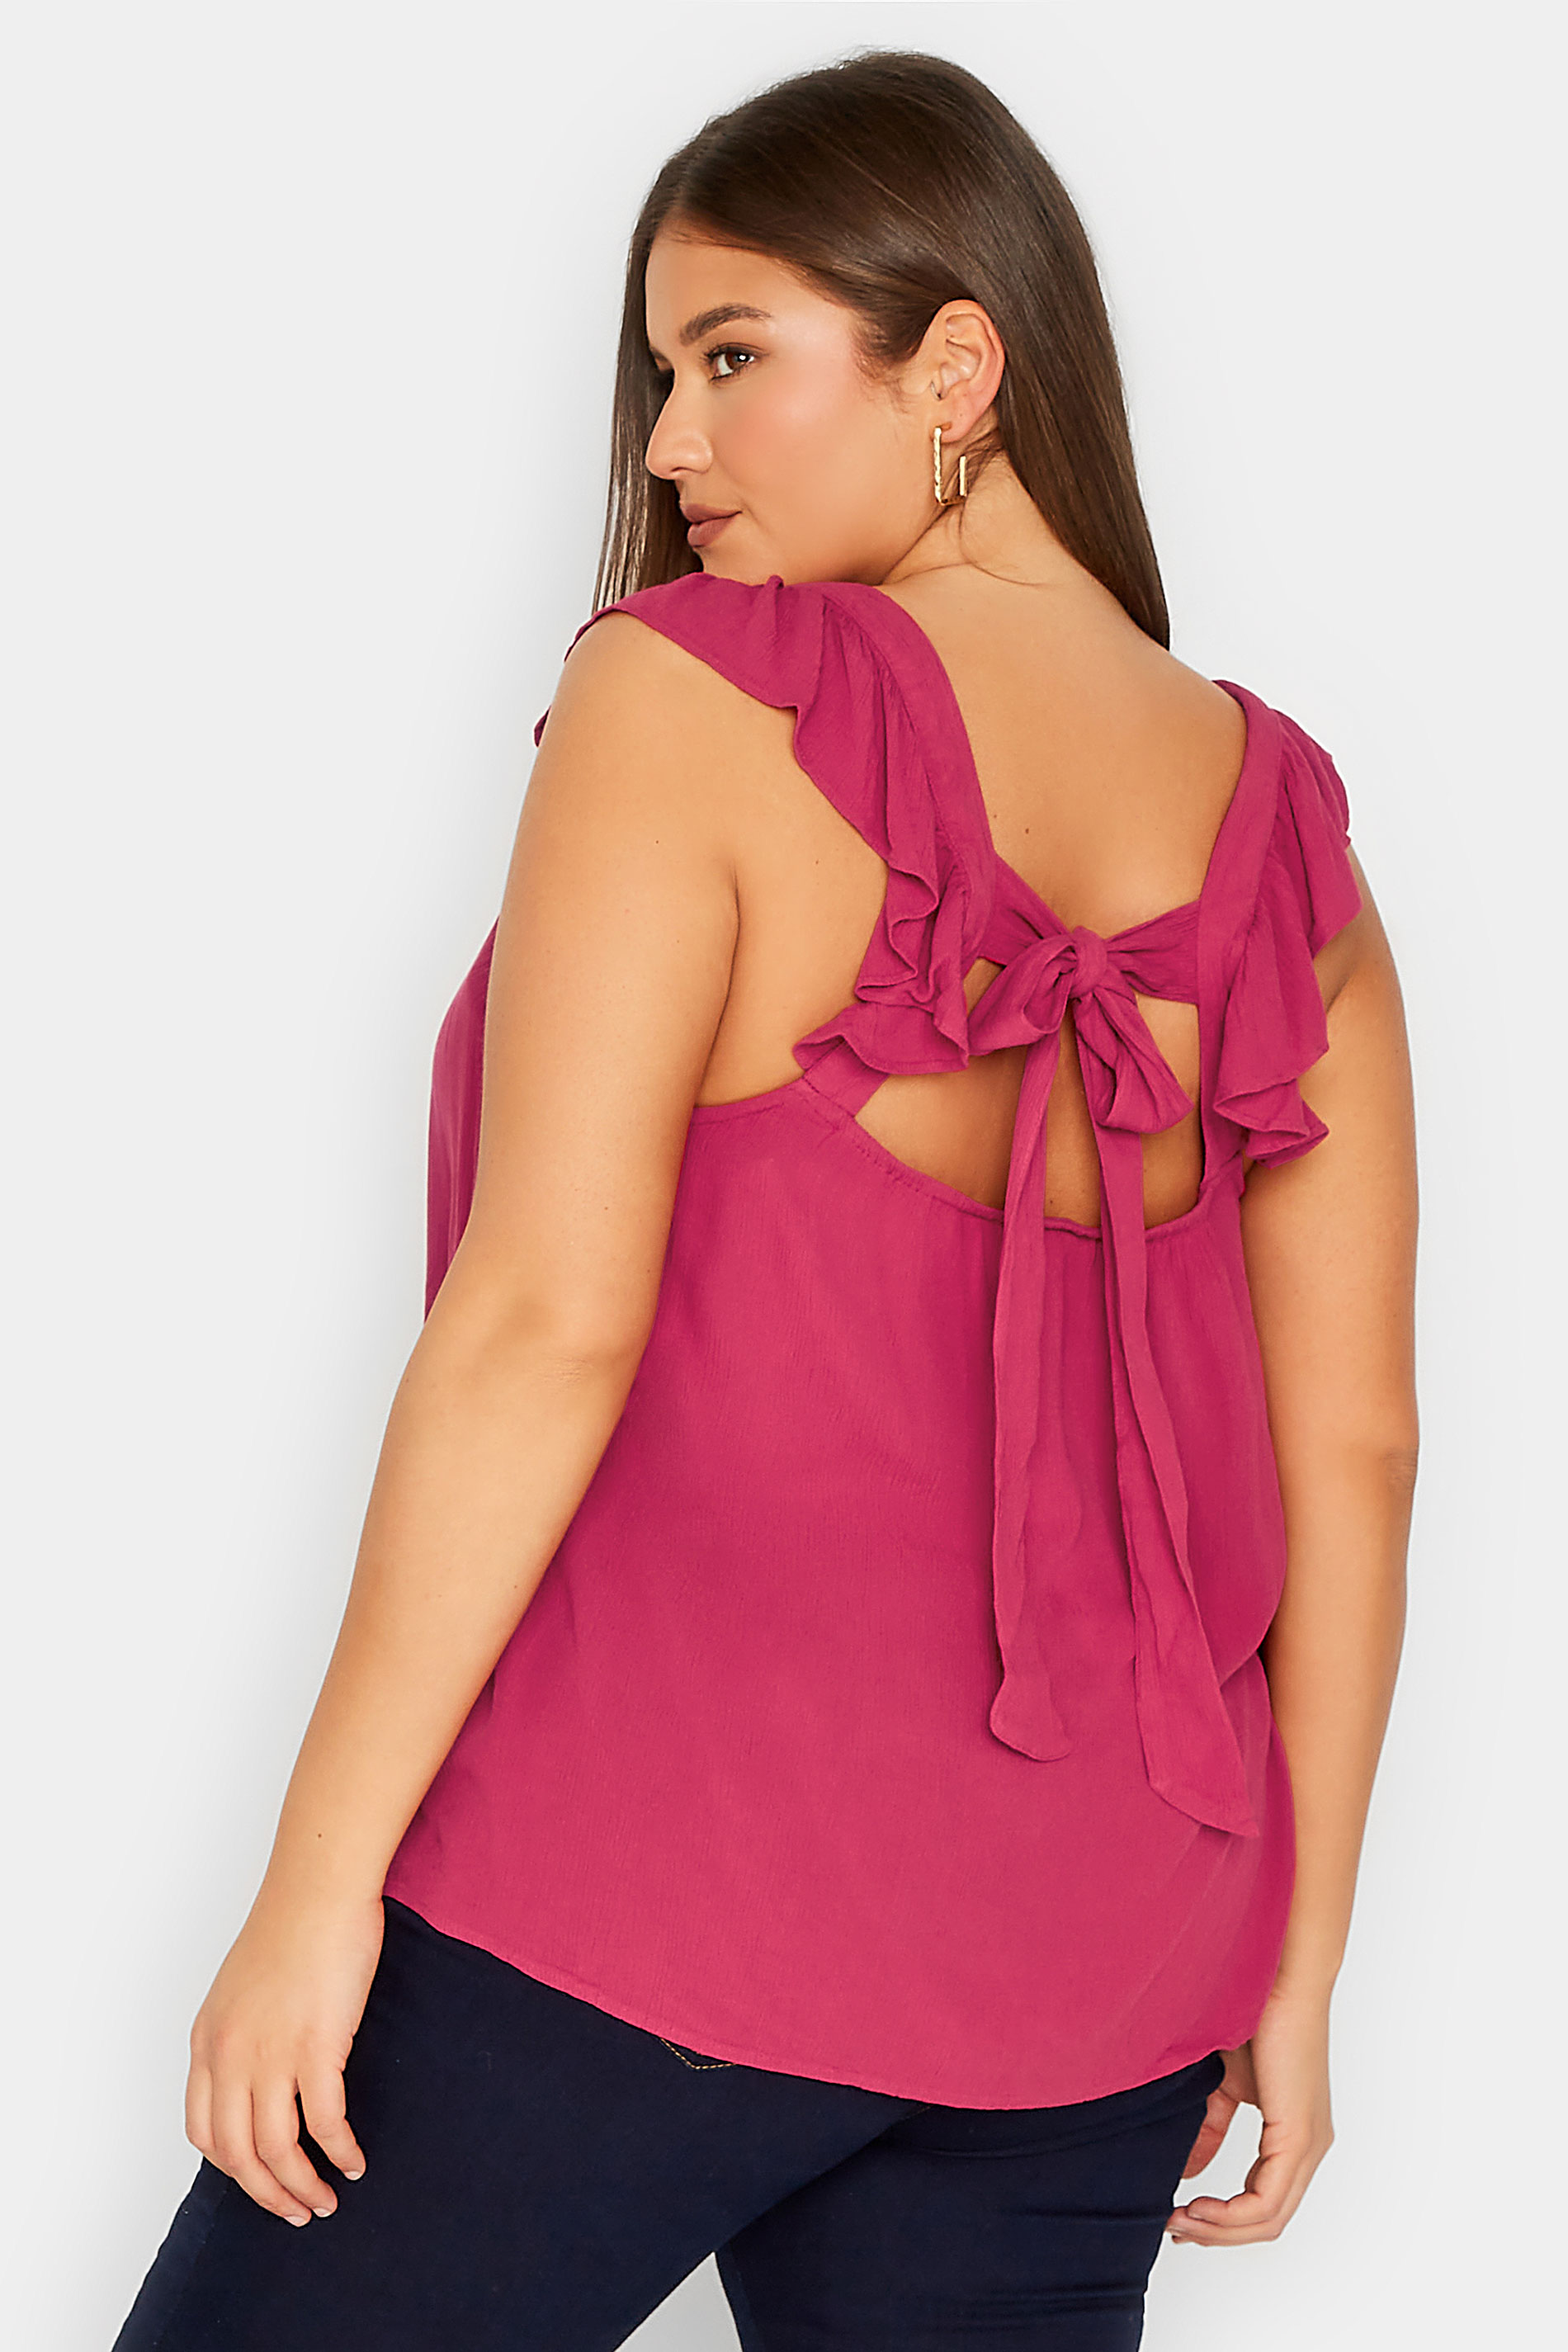 LTS Tall Women's Pink Crinkle Frill Top | Long Tall Sally 3